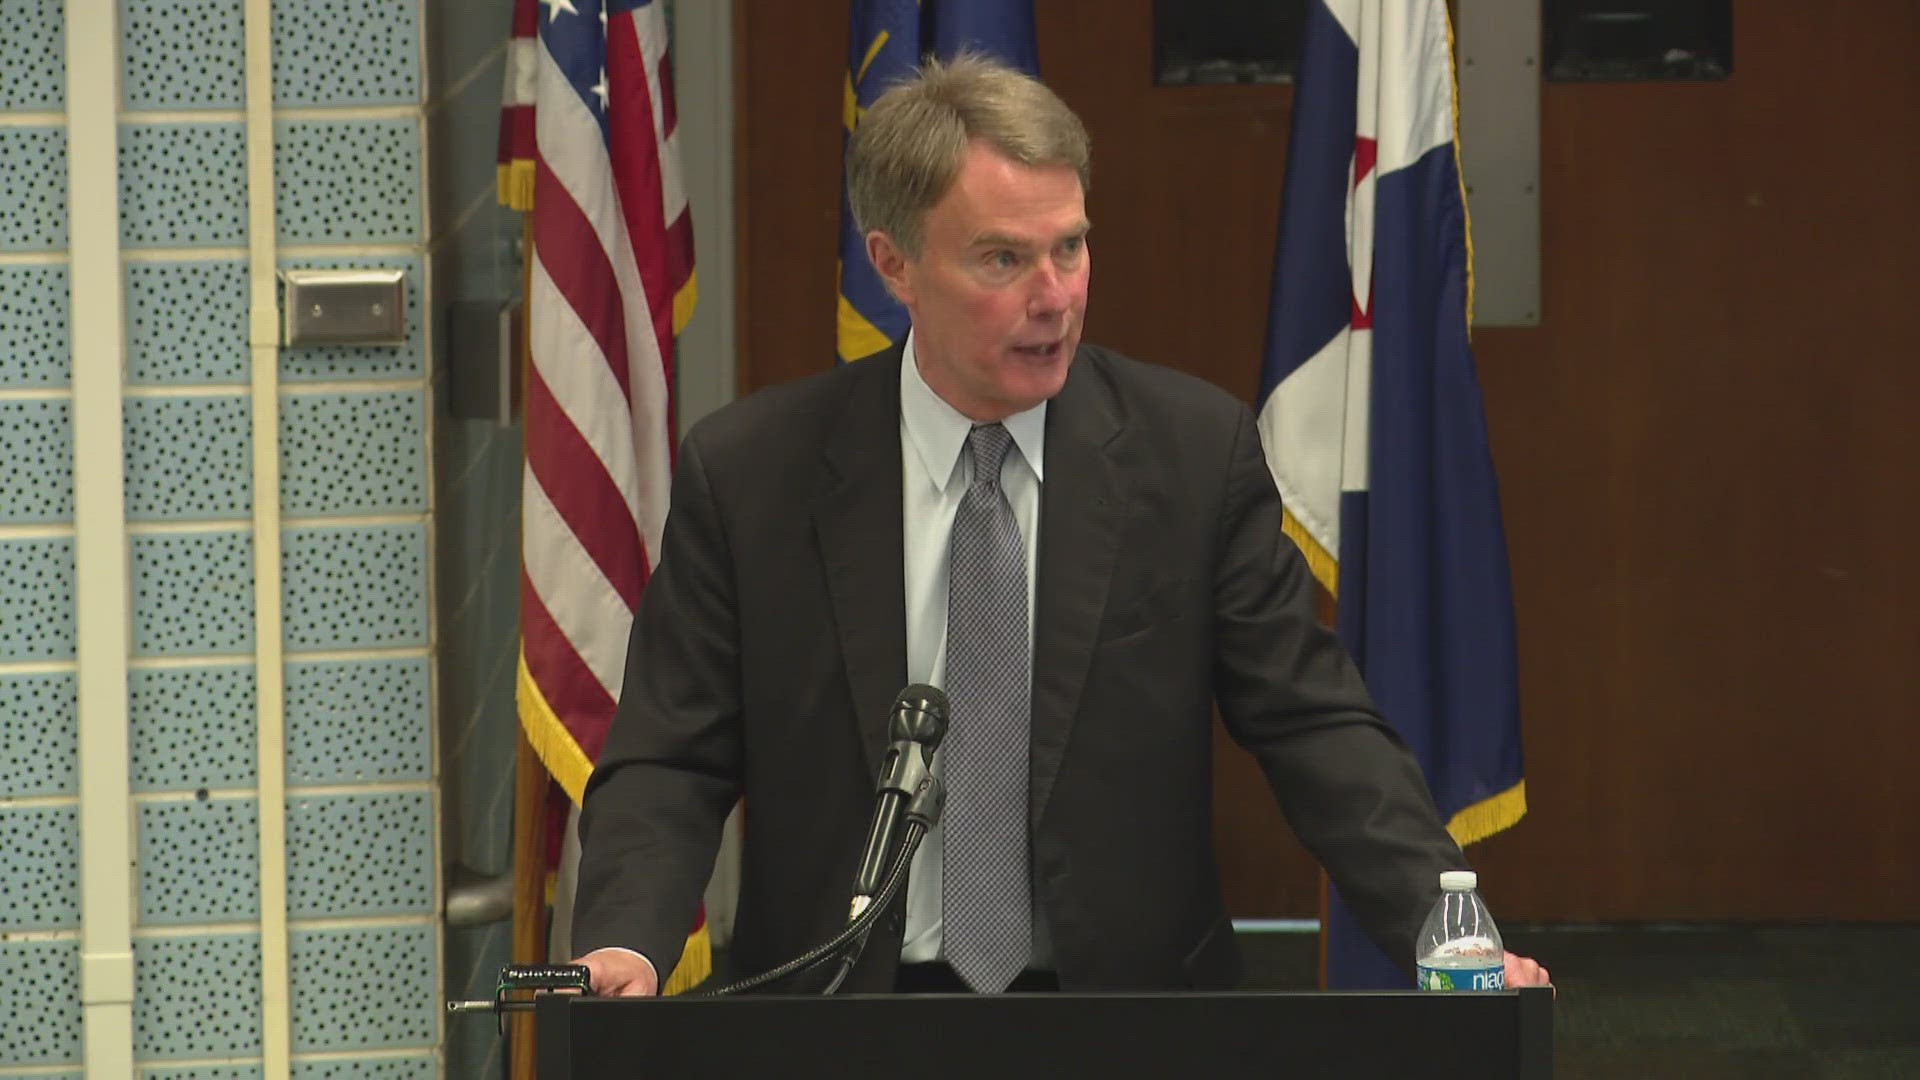 Mayor Joe Hogsett plans to go before the City-County Council and propose a ban on semi-automatic weapons and ending permitless carry in Indianapolis.